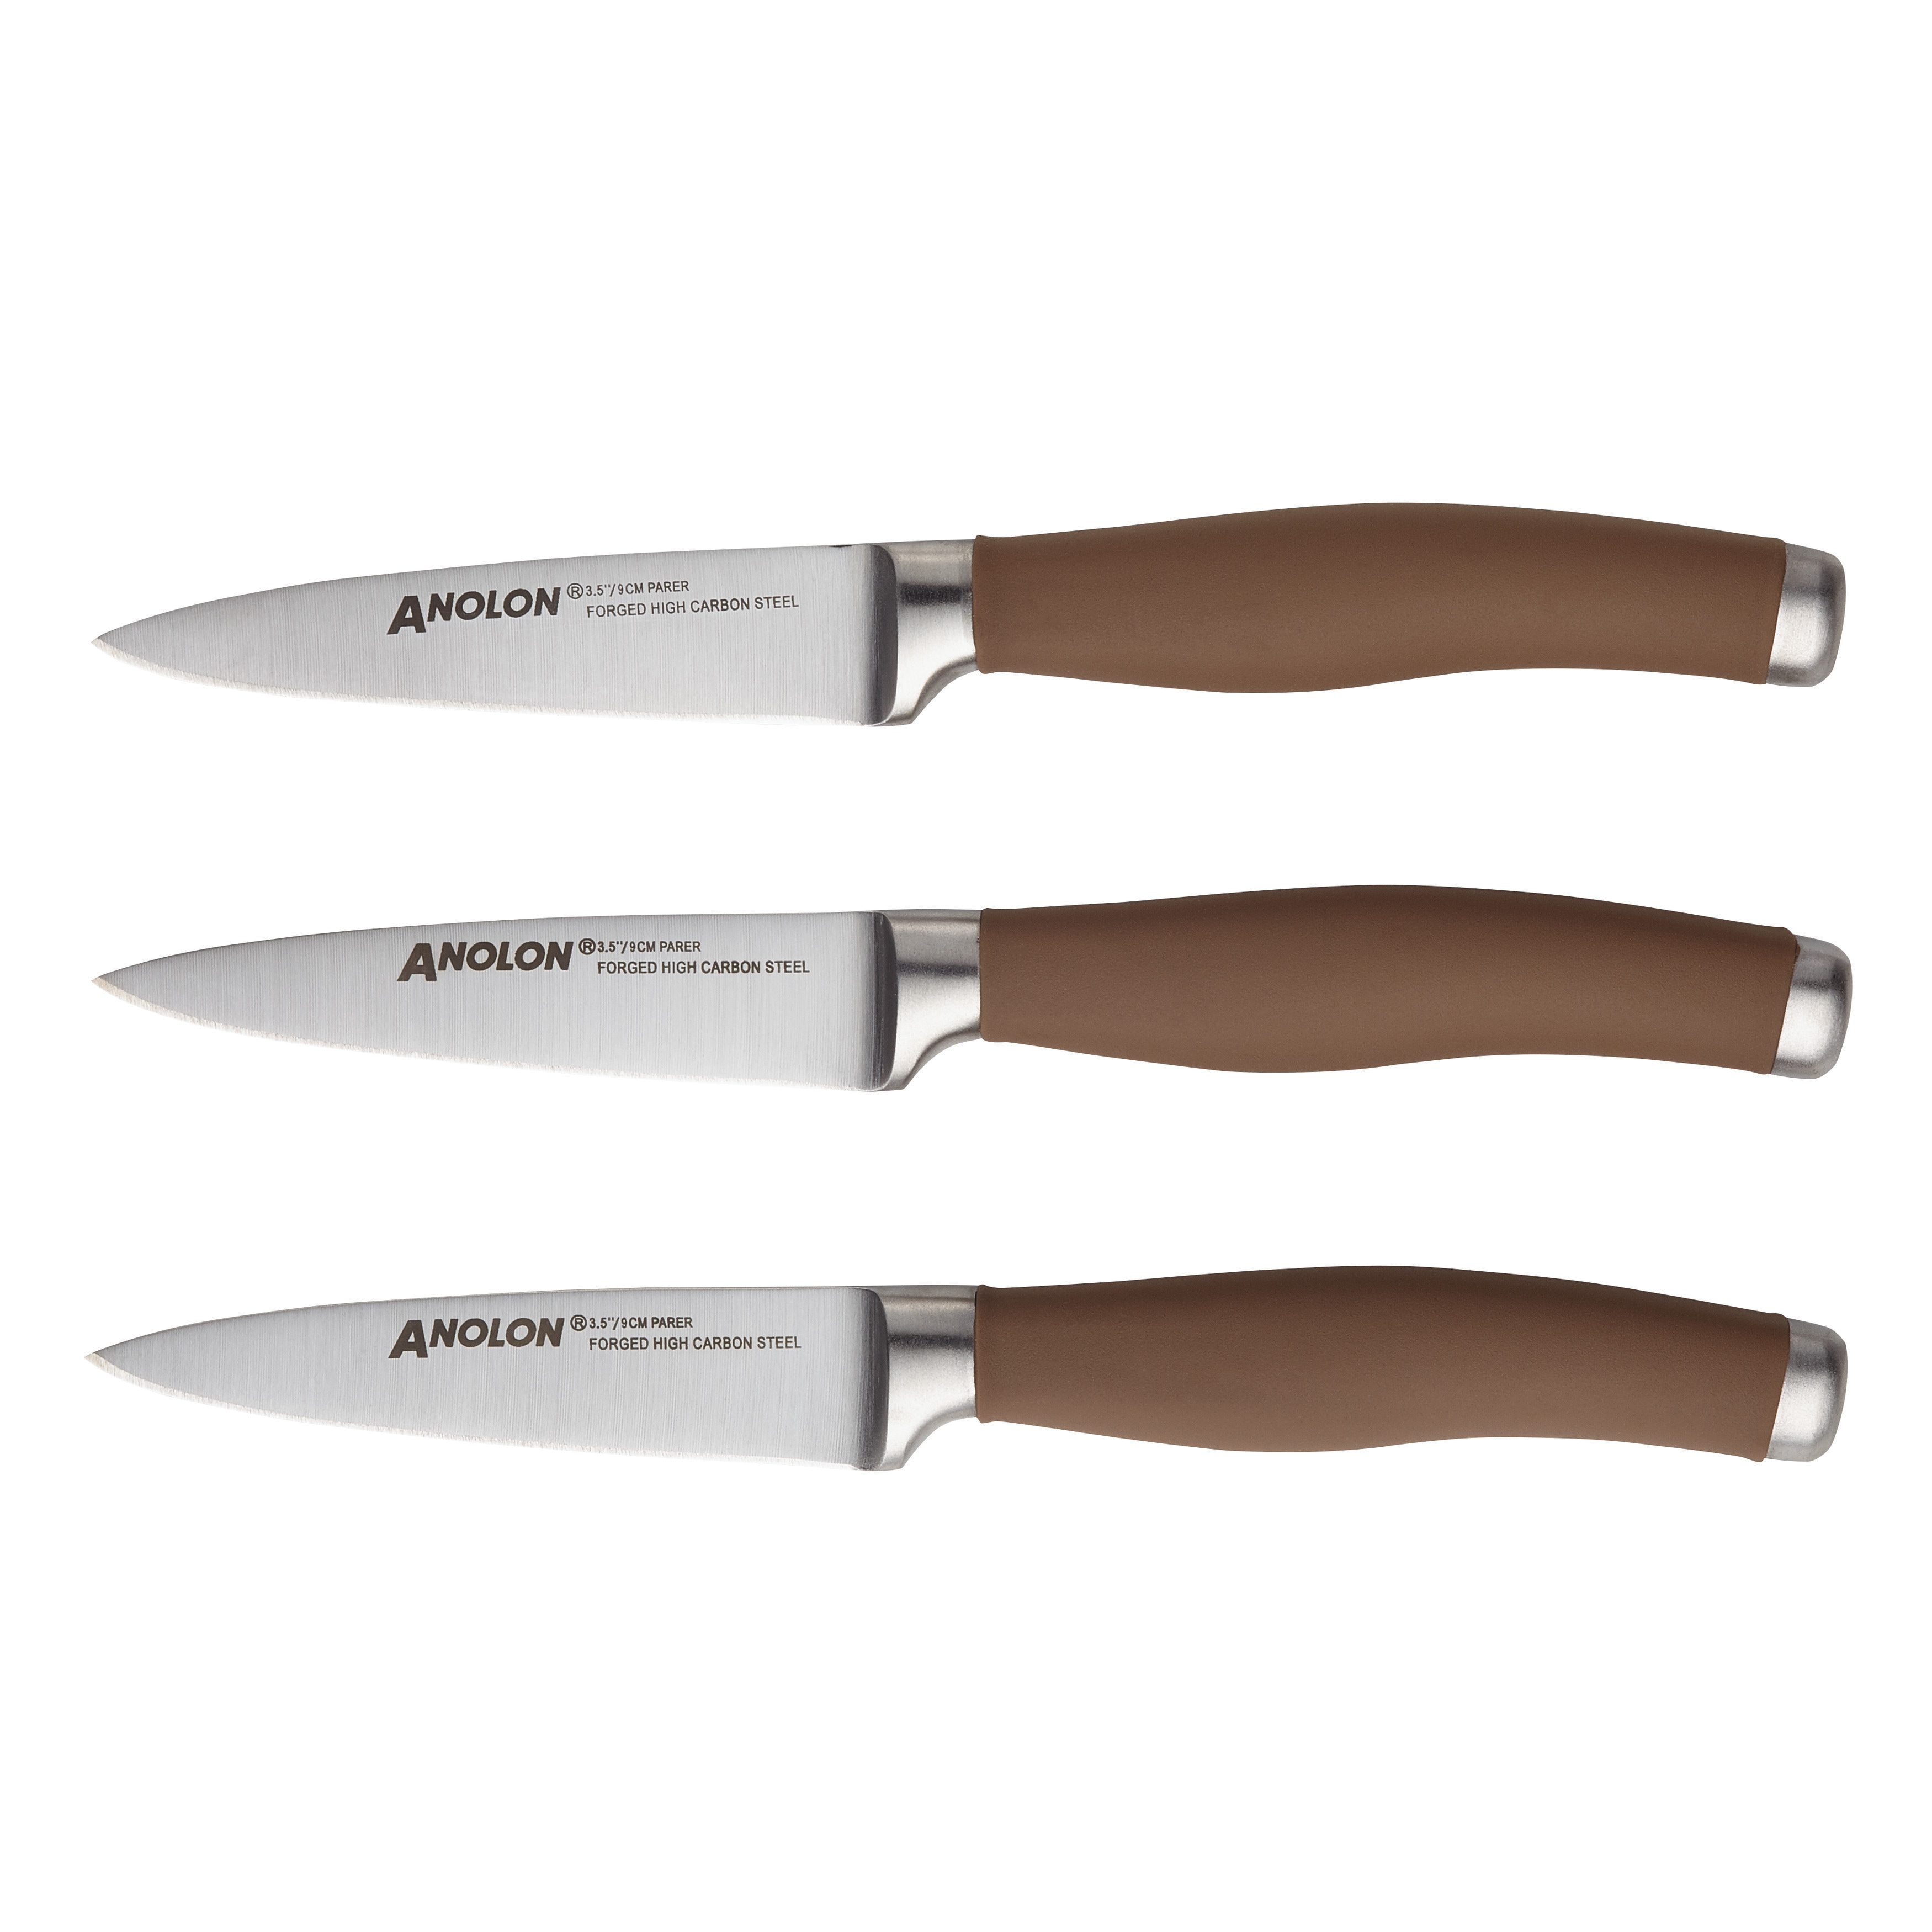 https://ak1.ostkcdn.com/images/products/12557414/Anolon-r-SureGrip-r-Cutlery-Japanese-Stainless-Steel-Paring-Knives-with-Sheaths-3-Piece-Set-Bronze-66ae6c17-540c-4fce-9f63-dbfaa8a1dc47.jpg